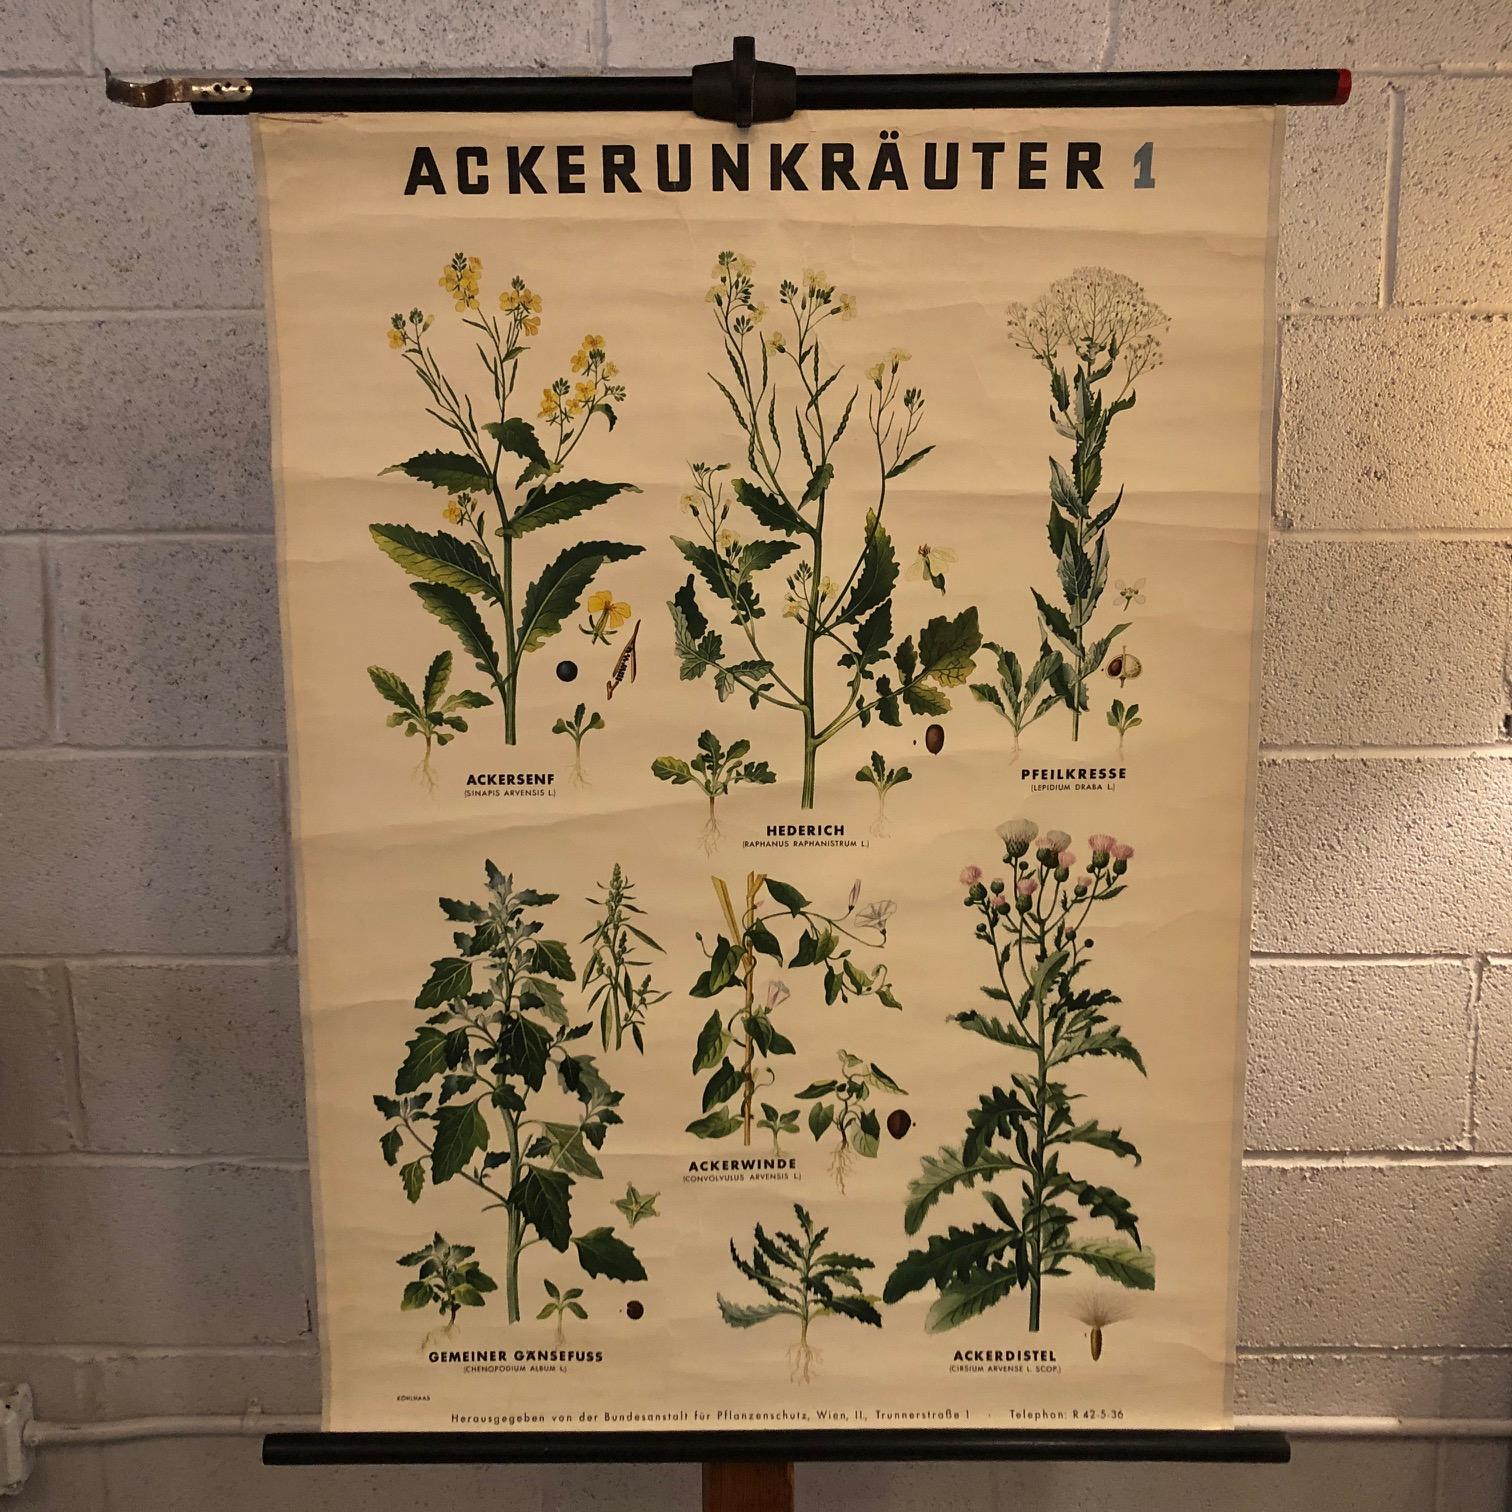 German educational, botanical chart illustrating Ackerunkräuter 1 / field weeds is printed on canvas-backed paper on painted maple rods with string and hook for hanging. Botanical Illustration chart.